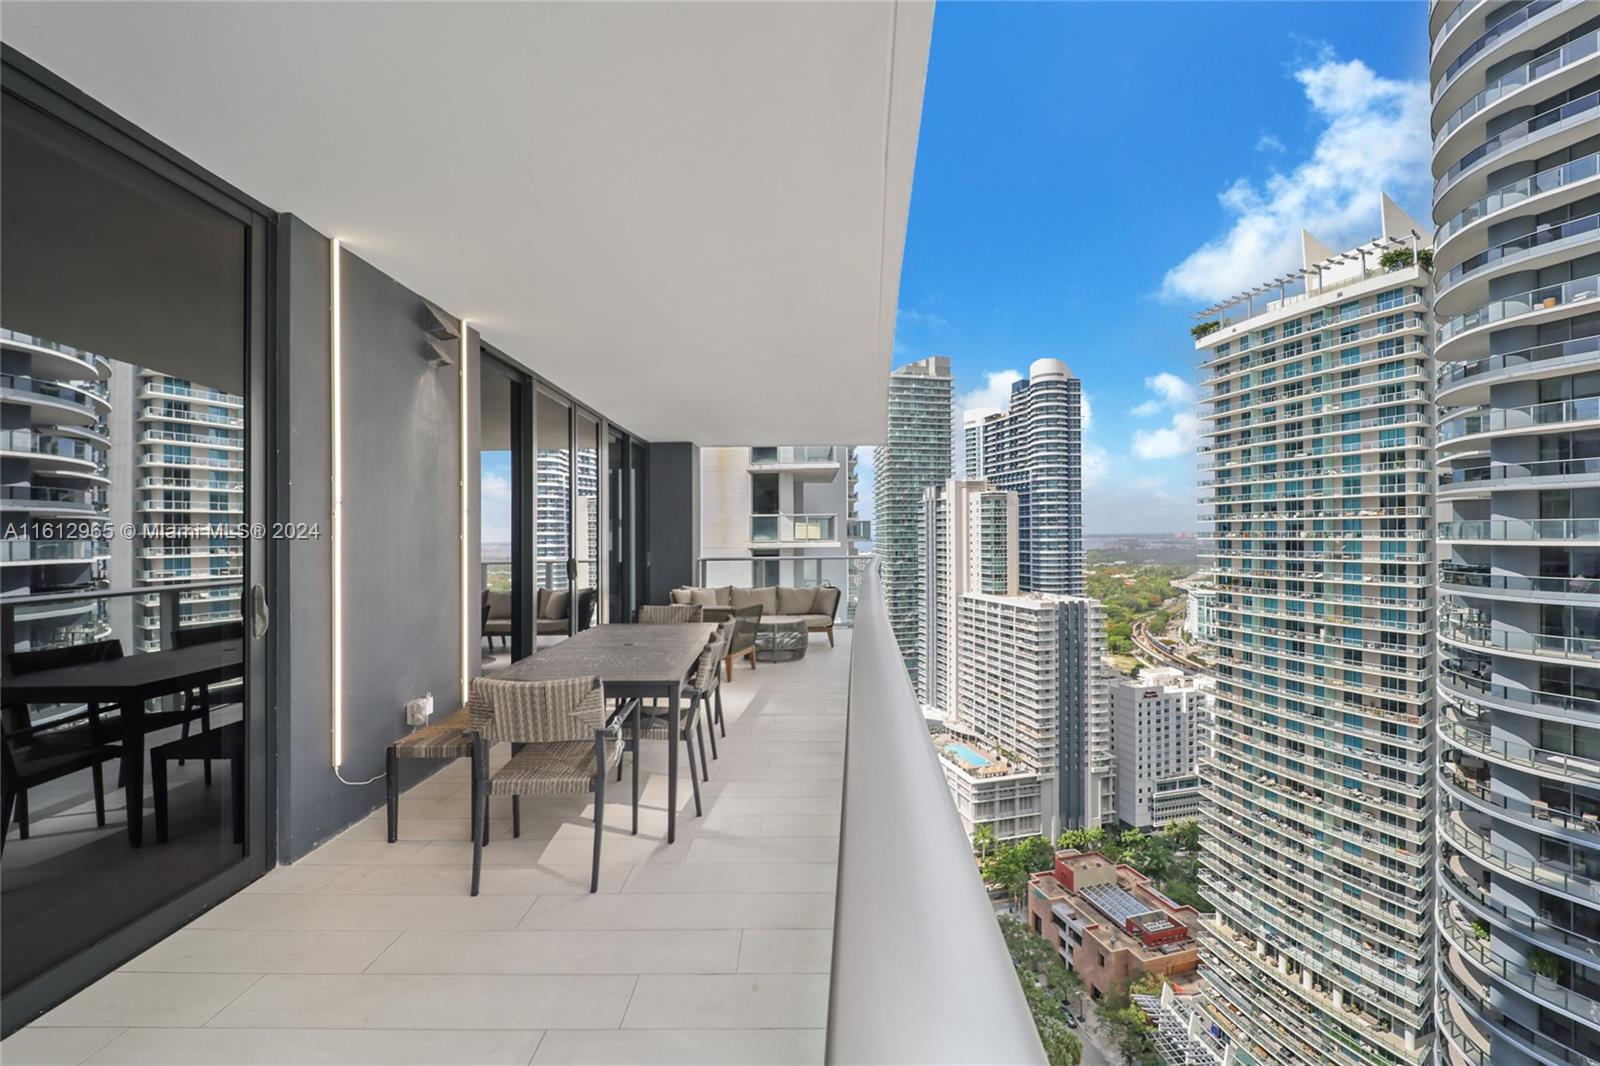 Welcome to this beautiful TURNKEY, FULLY FURNISHED renovated corner unit on the 06 lines of 1010 Brickell Ave. It offers luxury at every turn: a 3-bedroom (converted from 2 + Den), 3-bath gem with walk-in closets, and a top-of-the-line kitchen with appliances, it boasts an expansive balcony showcasing breathtaking Miami views. Residents enjoy exclusive amenities, an upscale restaurant, and a stunning swimming pool on the 50th floor—the spa beckons with a jacuzzi, massage rooms, sauna, and steam room. Stay active with basketball, and racquetball courts, while kids explore the indoor playground and arcade. Located steps from Brickell City Centre and the Metro-mover, this is MIAMI living at its finest.